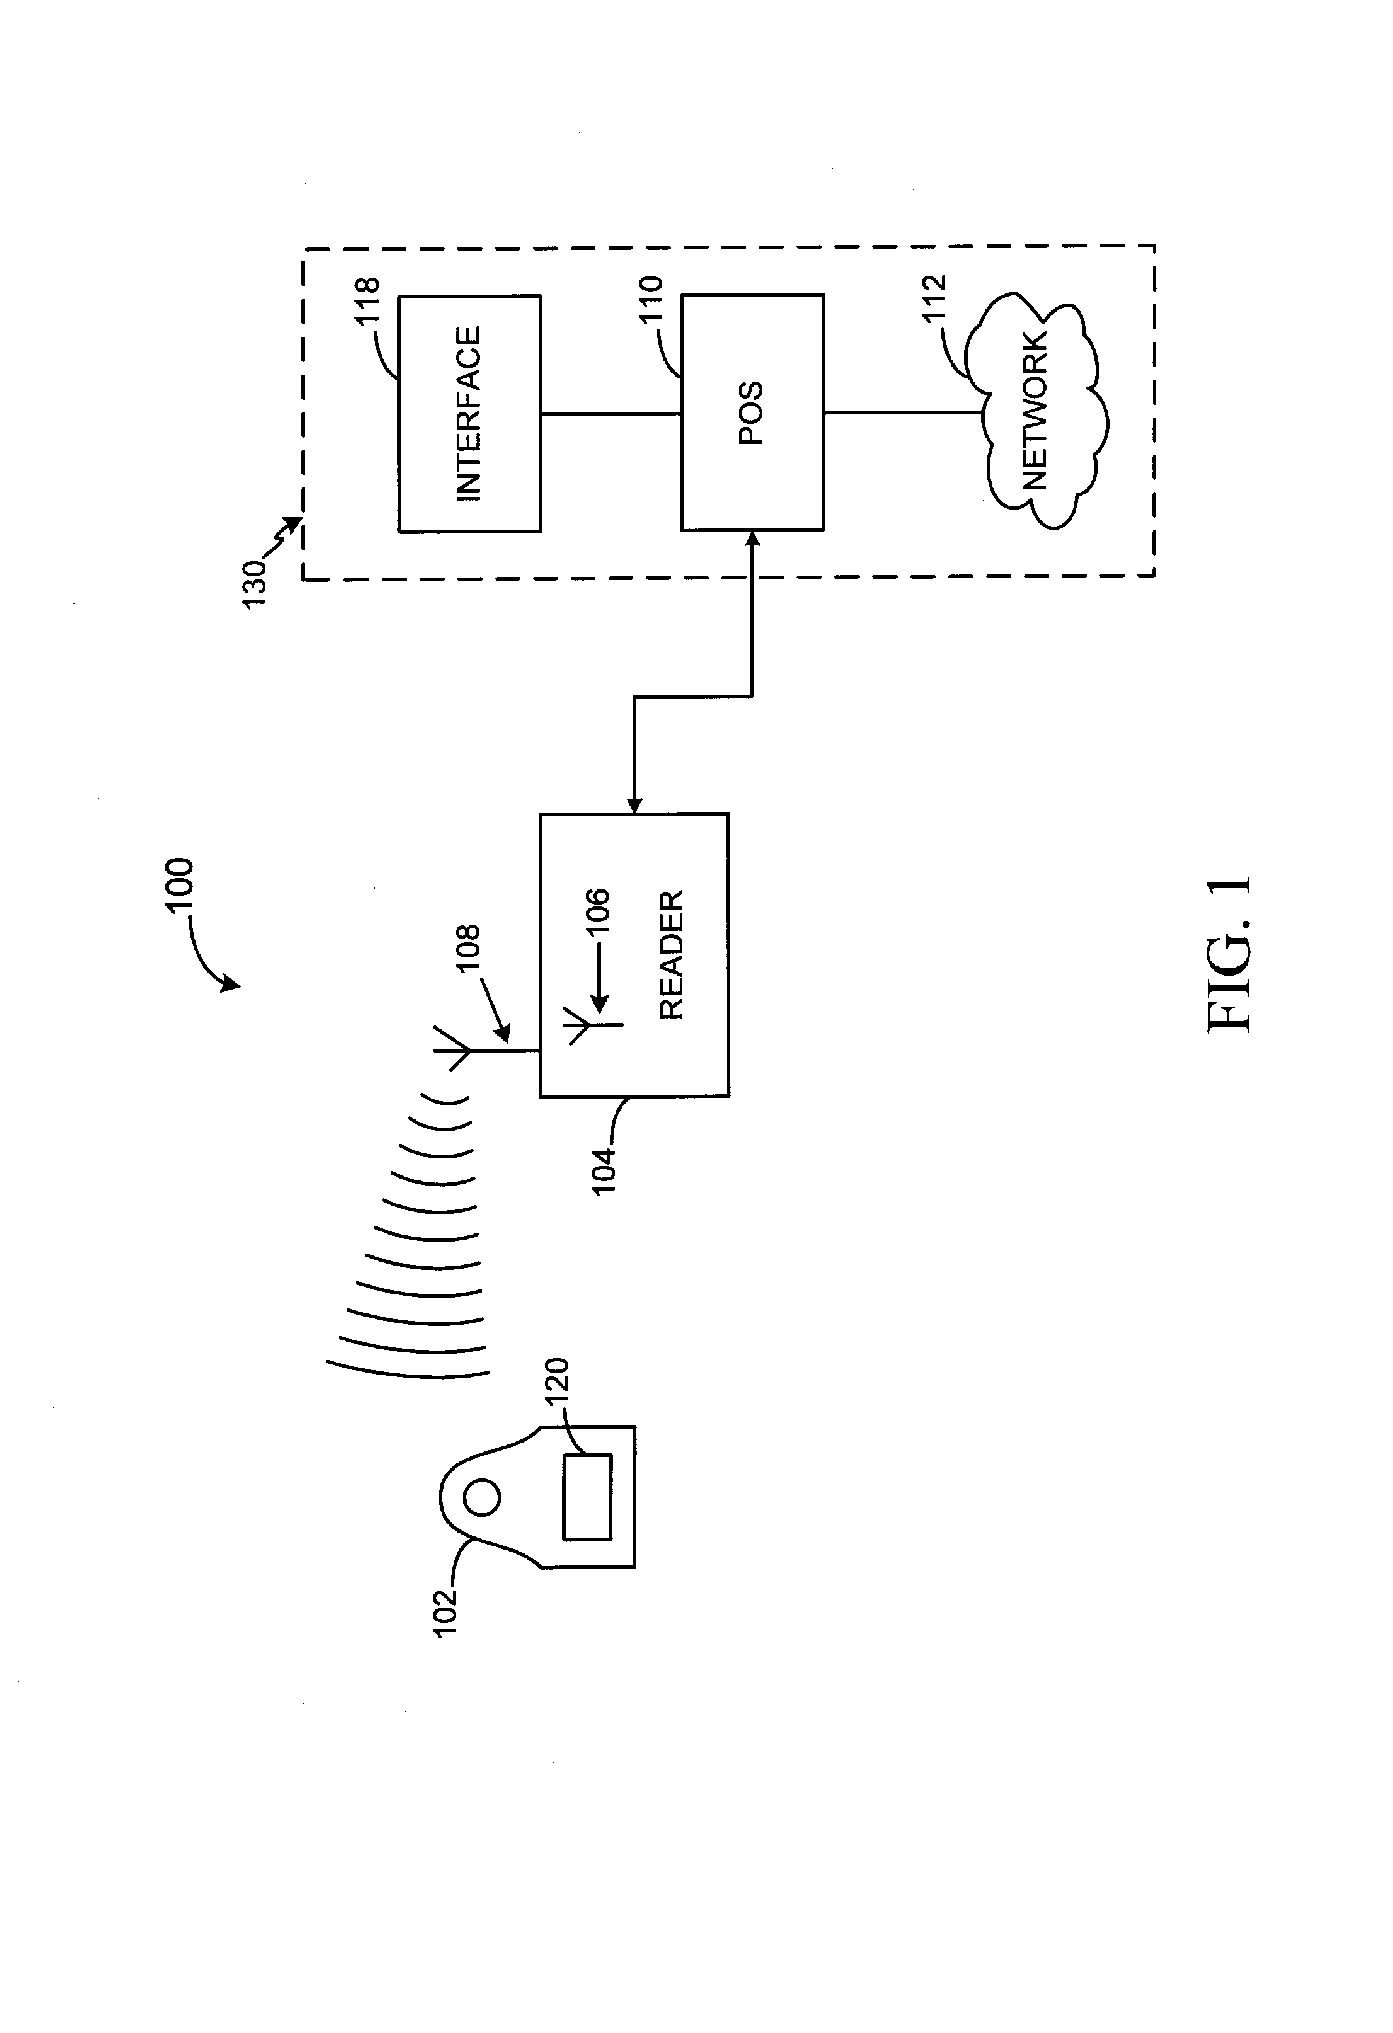 Foldable non-traditionally-sized RF transaction card system and method